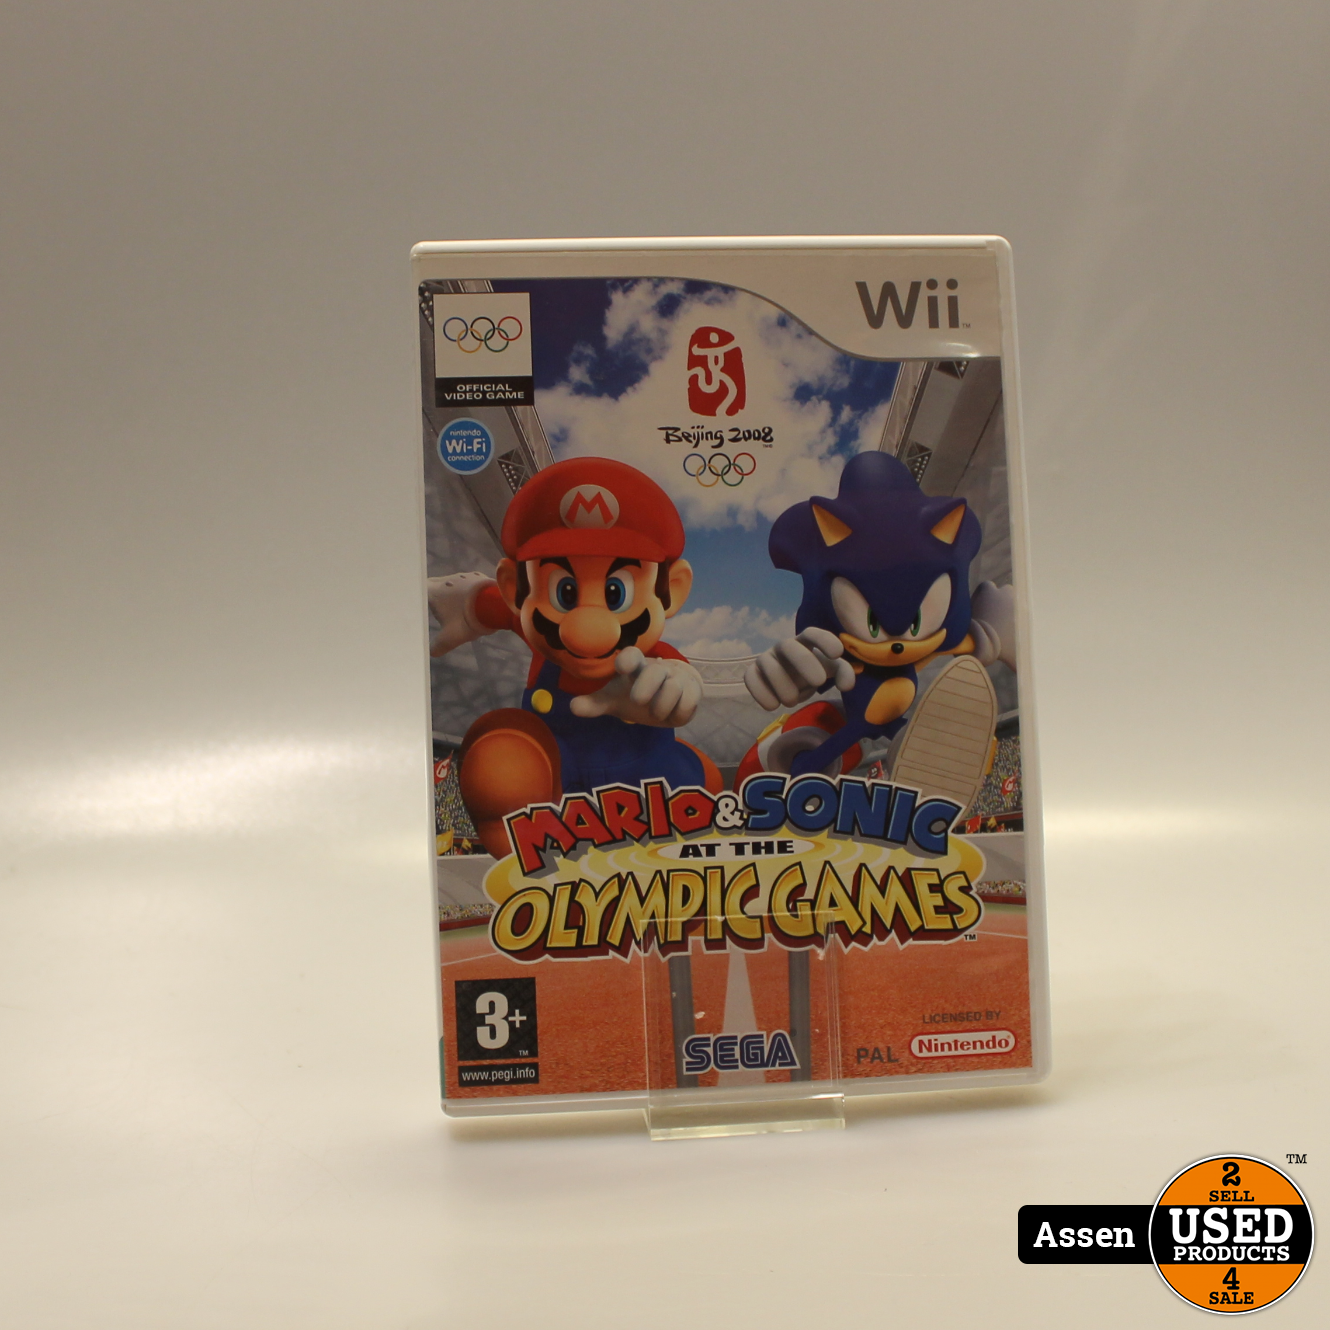 Bridge pier beest Scheiden Mario & sonic at the olympic games || wii game - Used Products Assen